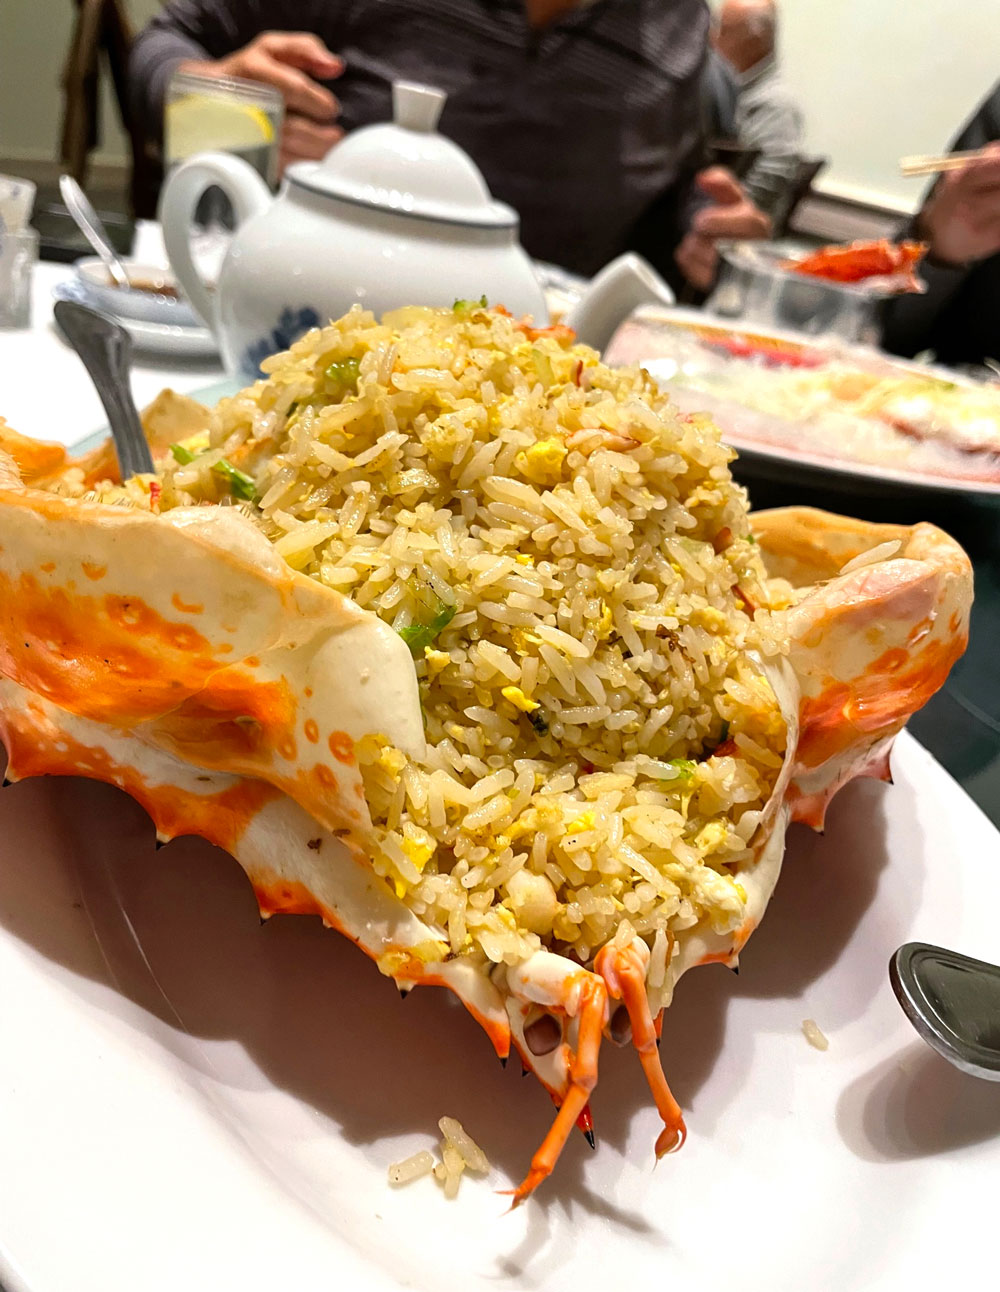 An image of King Crab Fried Rice in the shell of the crab, with people eating in the background.